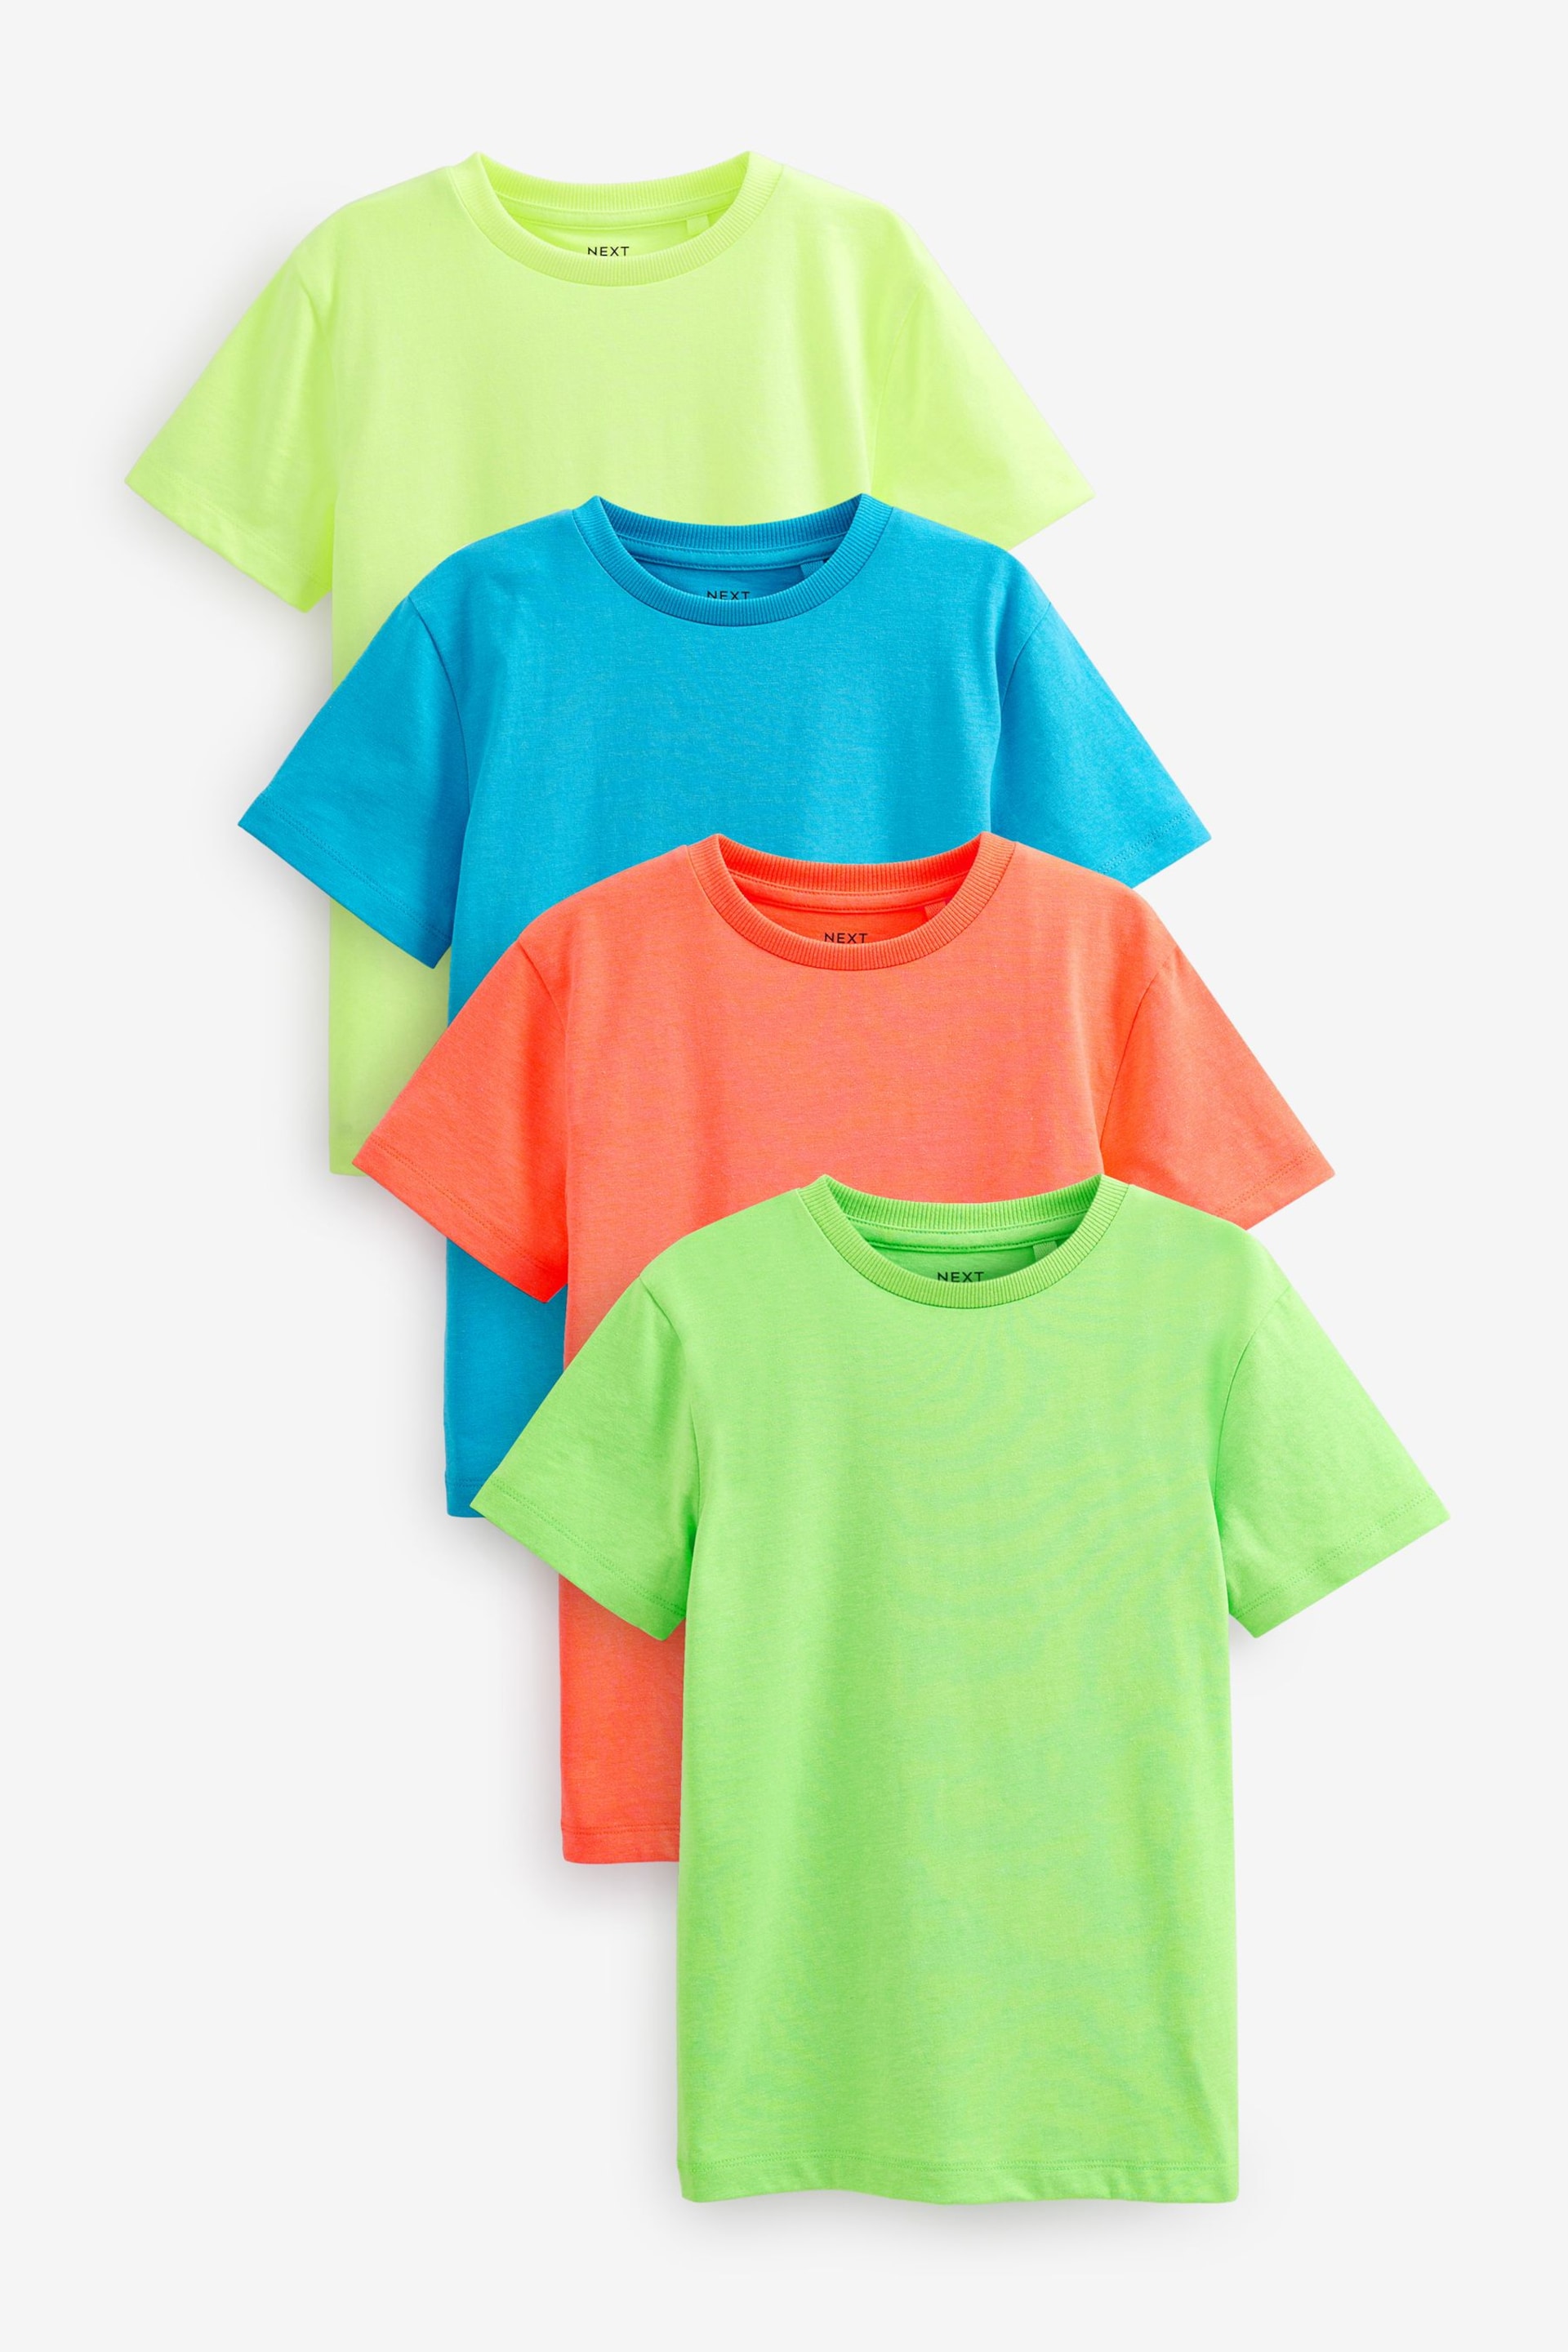 Multi Fluro Short Sleeves T-Shirts 4 Pack (3-16yrs) - Image 1 of 2